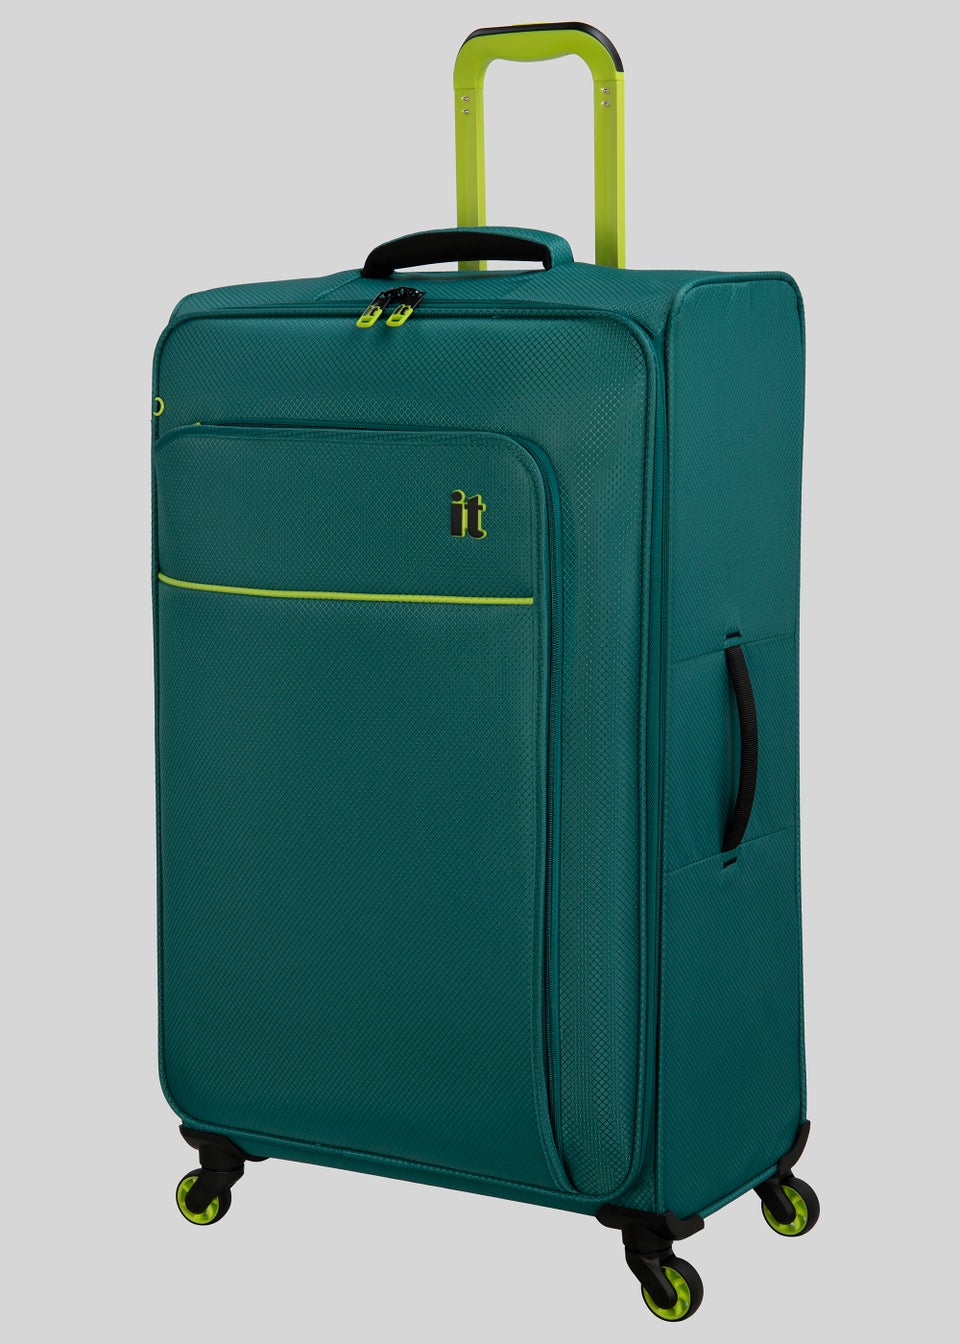 IT Luggage Teal Soft Shell Suitcase